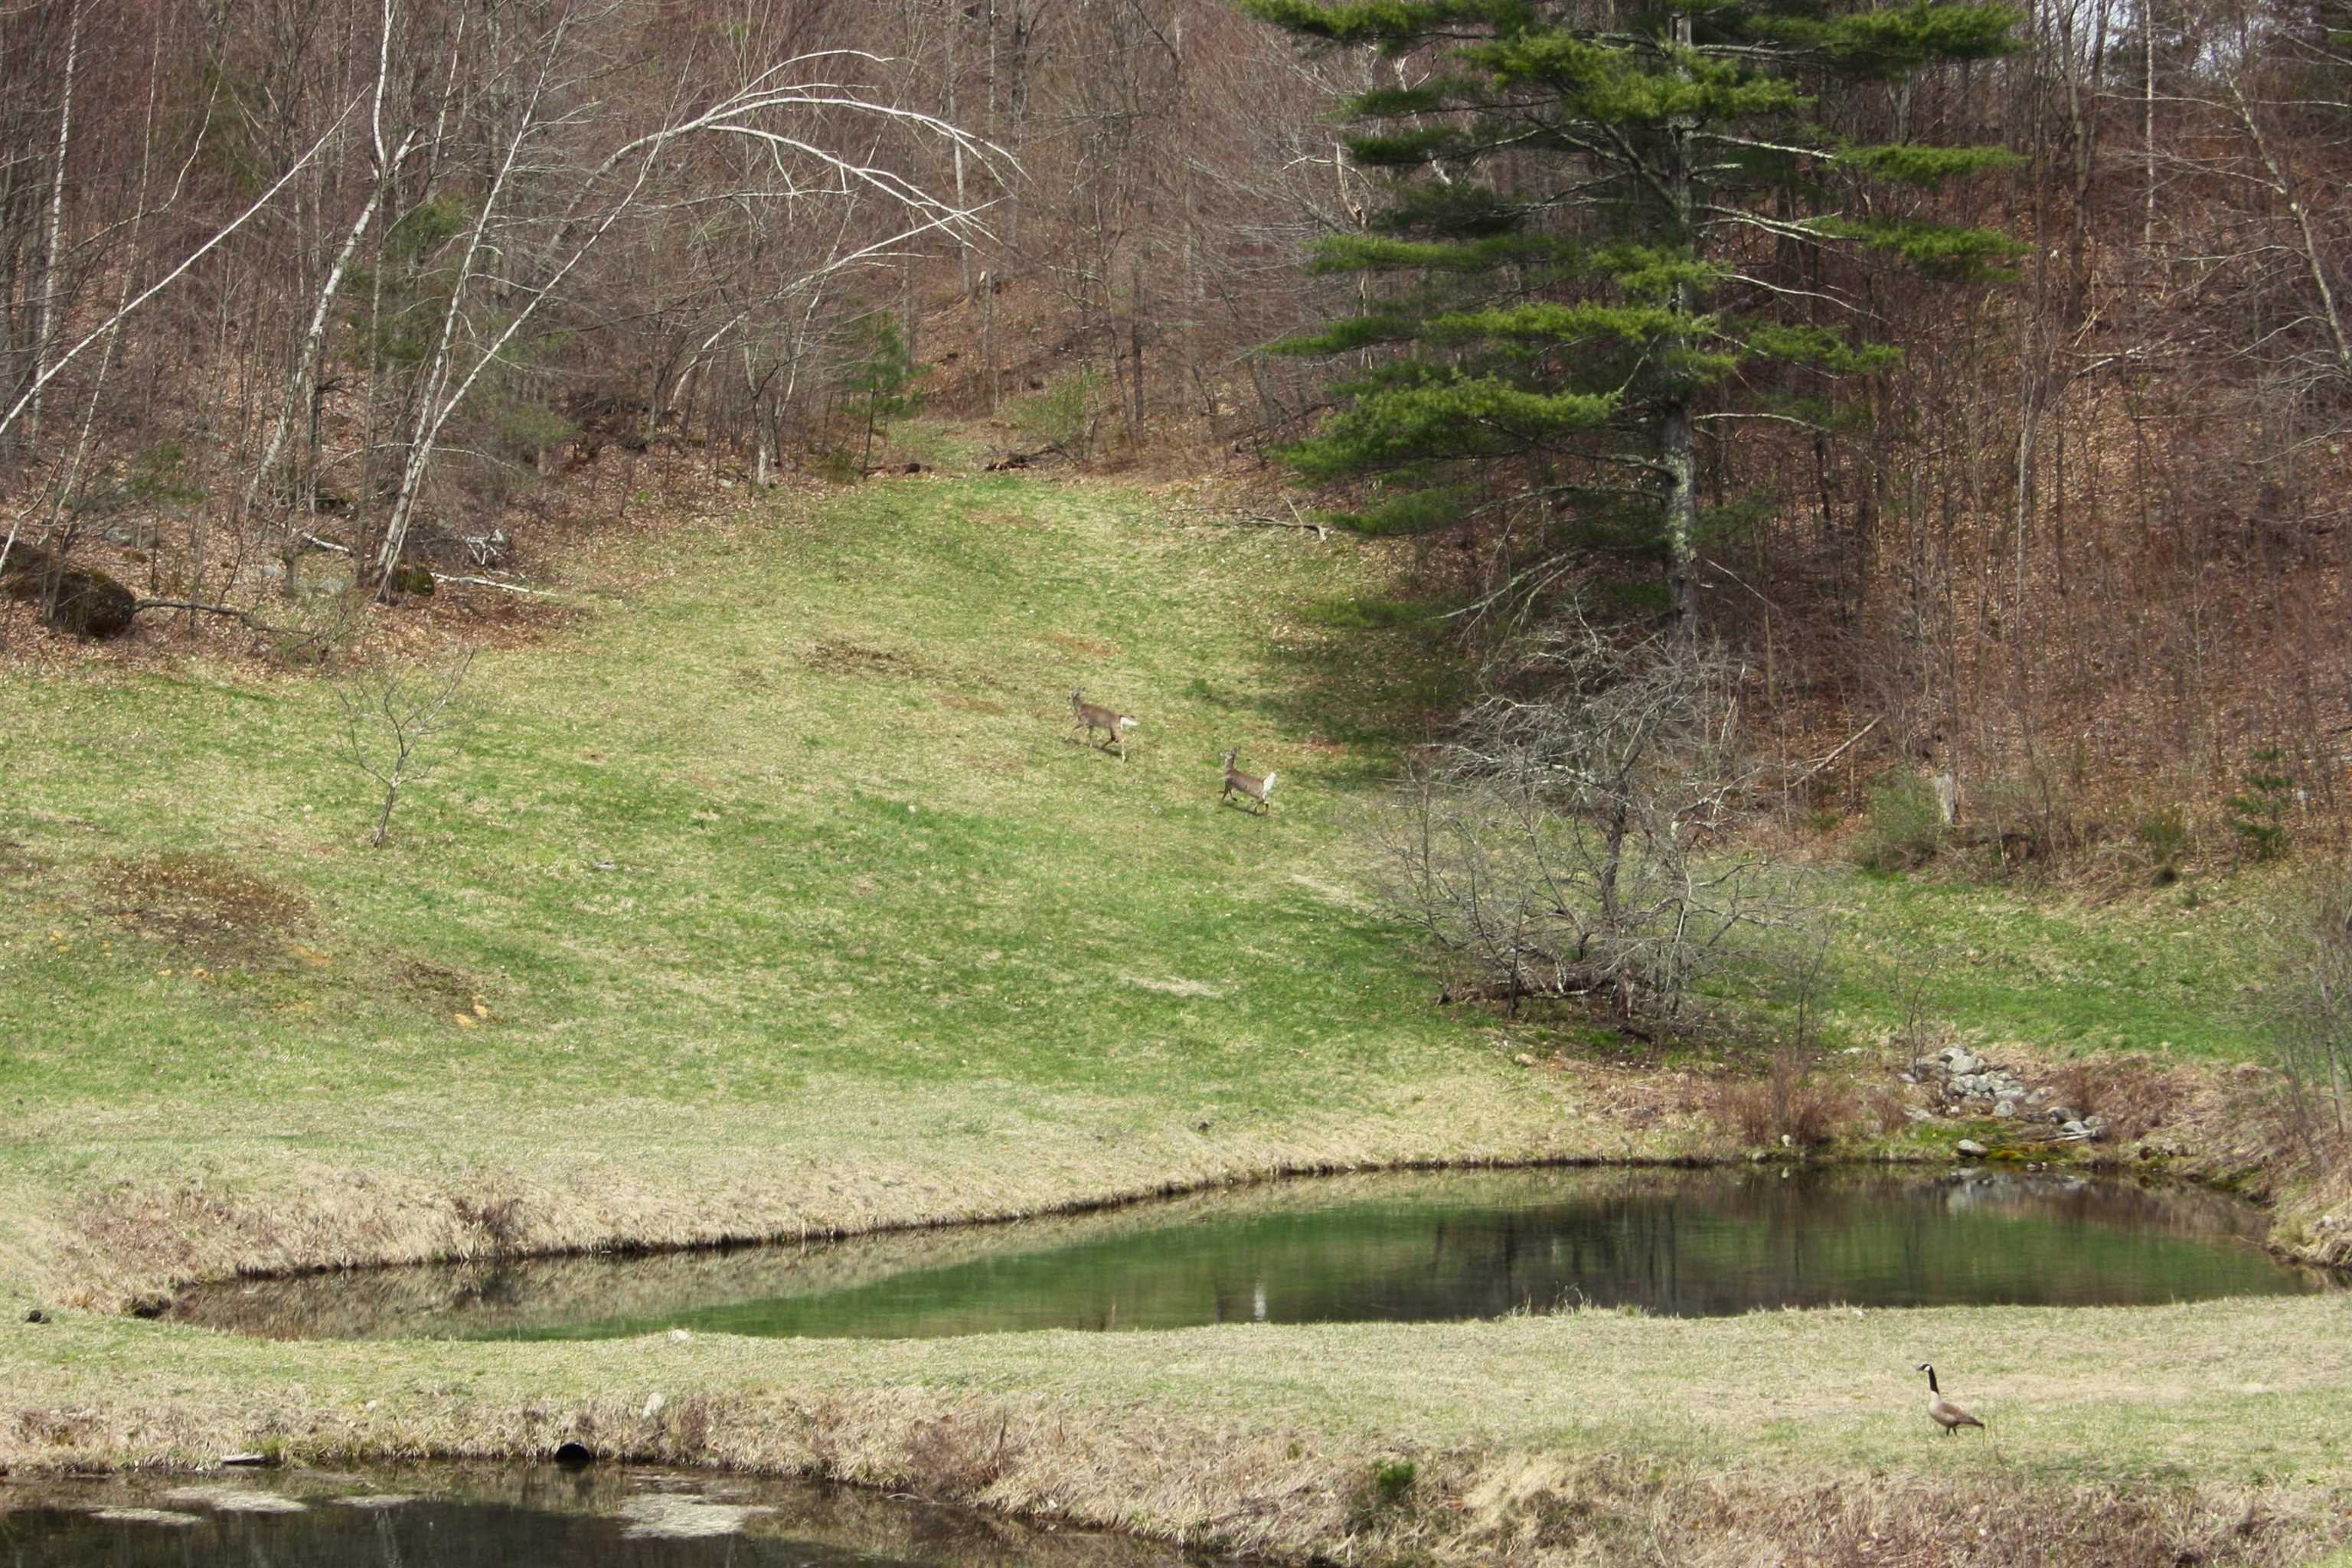 Hillside ponds with whitetail deer on the upland meadow.